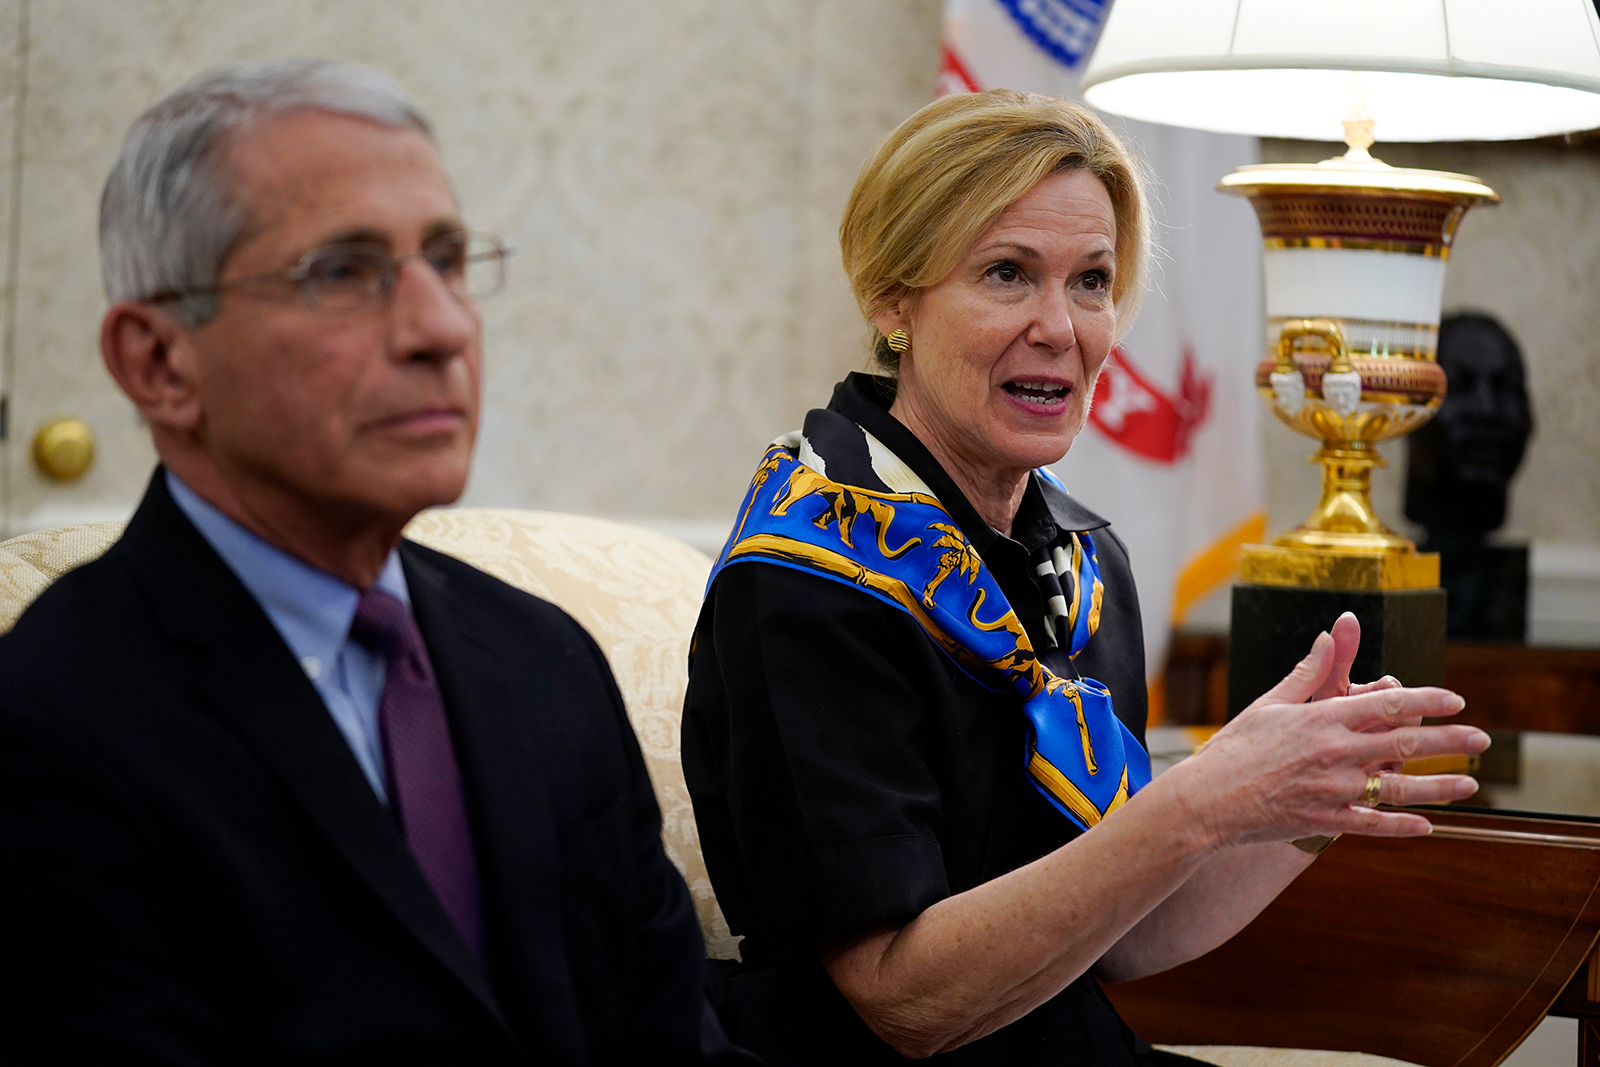 White House coronavirus response coordinator Dr. Deborah Birx, right, speaks as Director of the National Institute of Allergy and Infectious Diseases Dr. Anthony Fauci listens during a meeting about the coronavirus in the Oval Office on Wednesday, April 29.